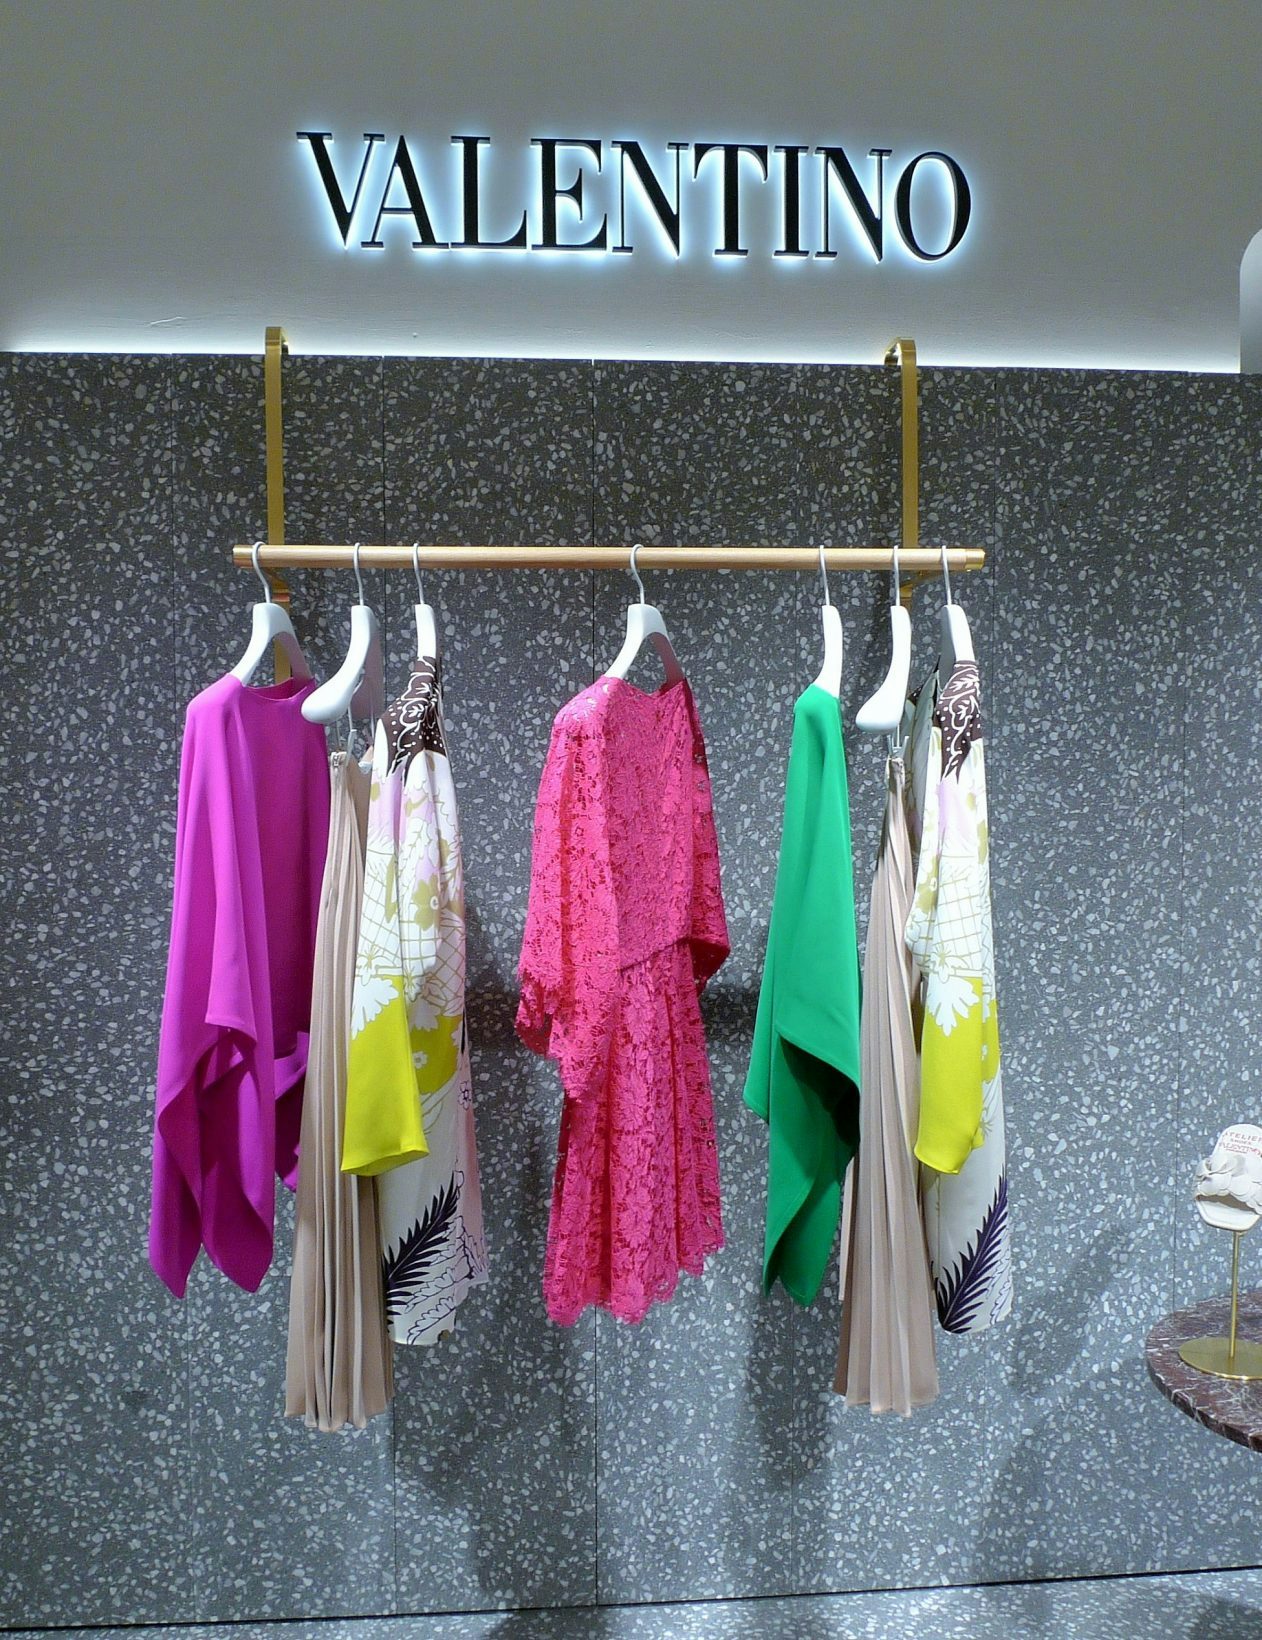 Valentino and Stella McCartney take another step towards recycling materials